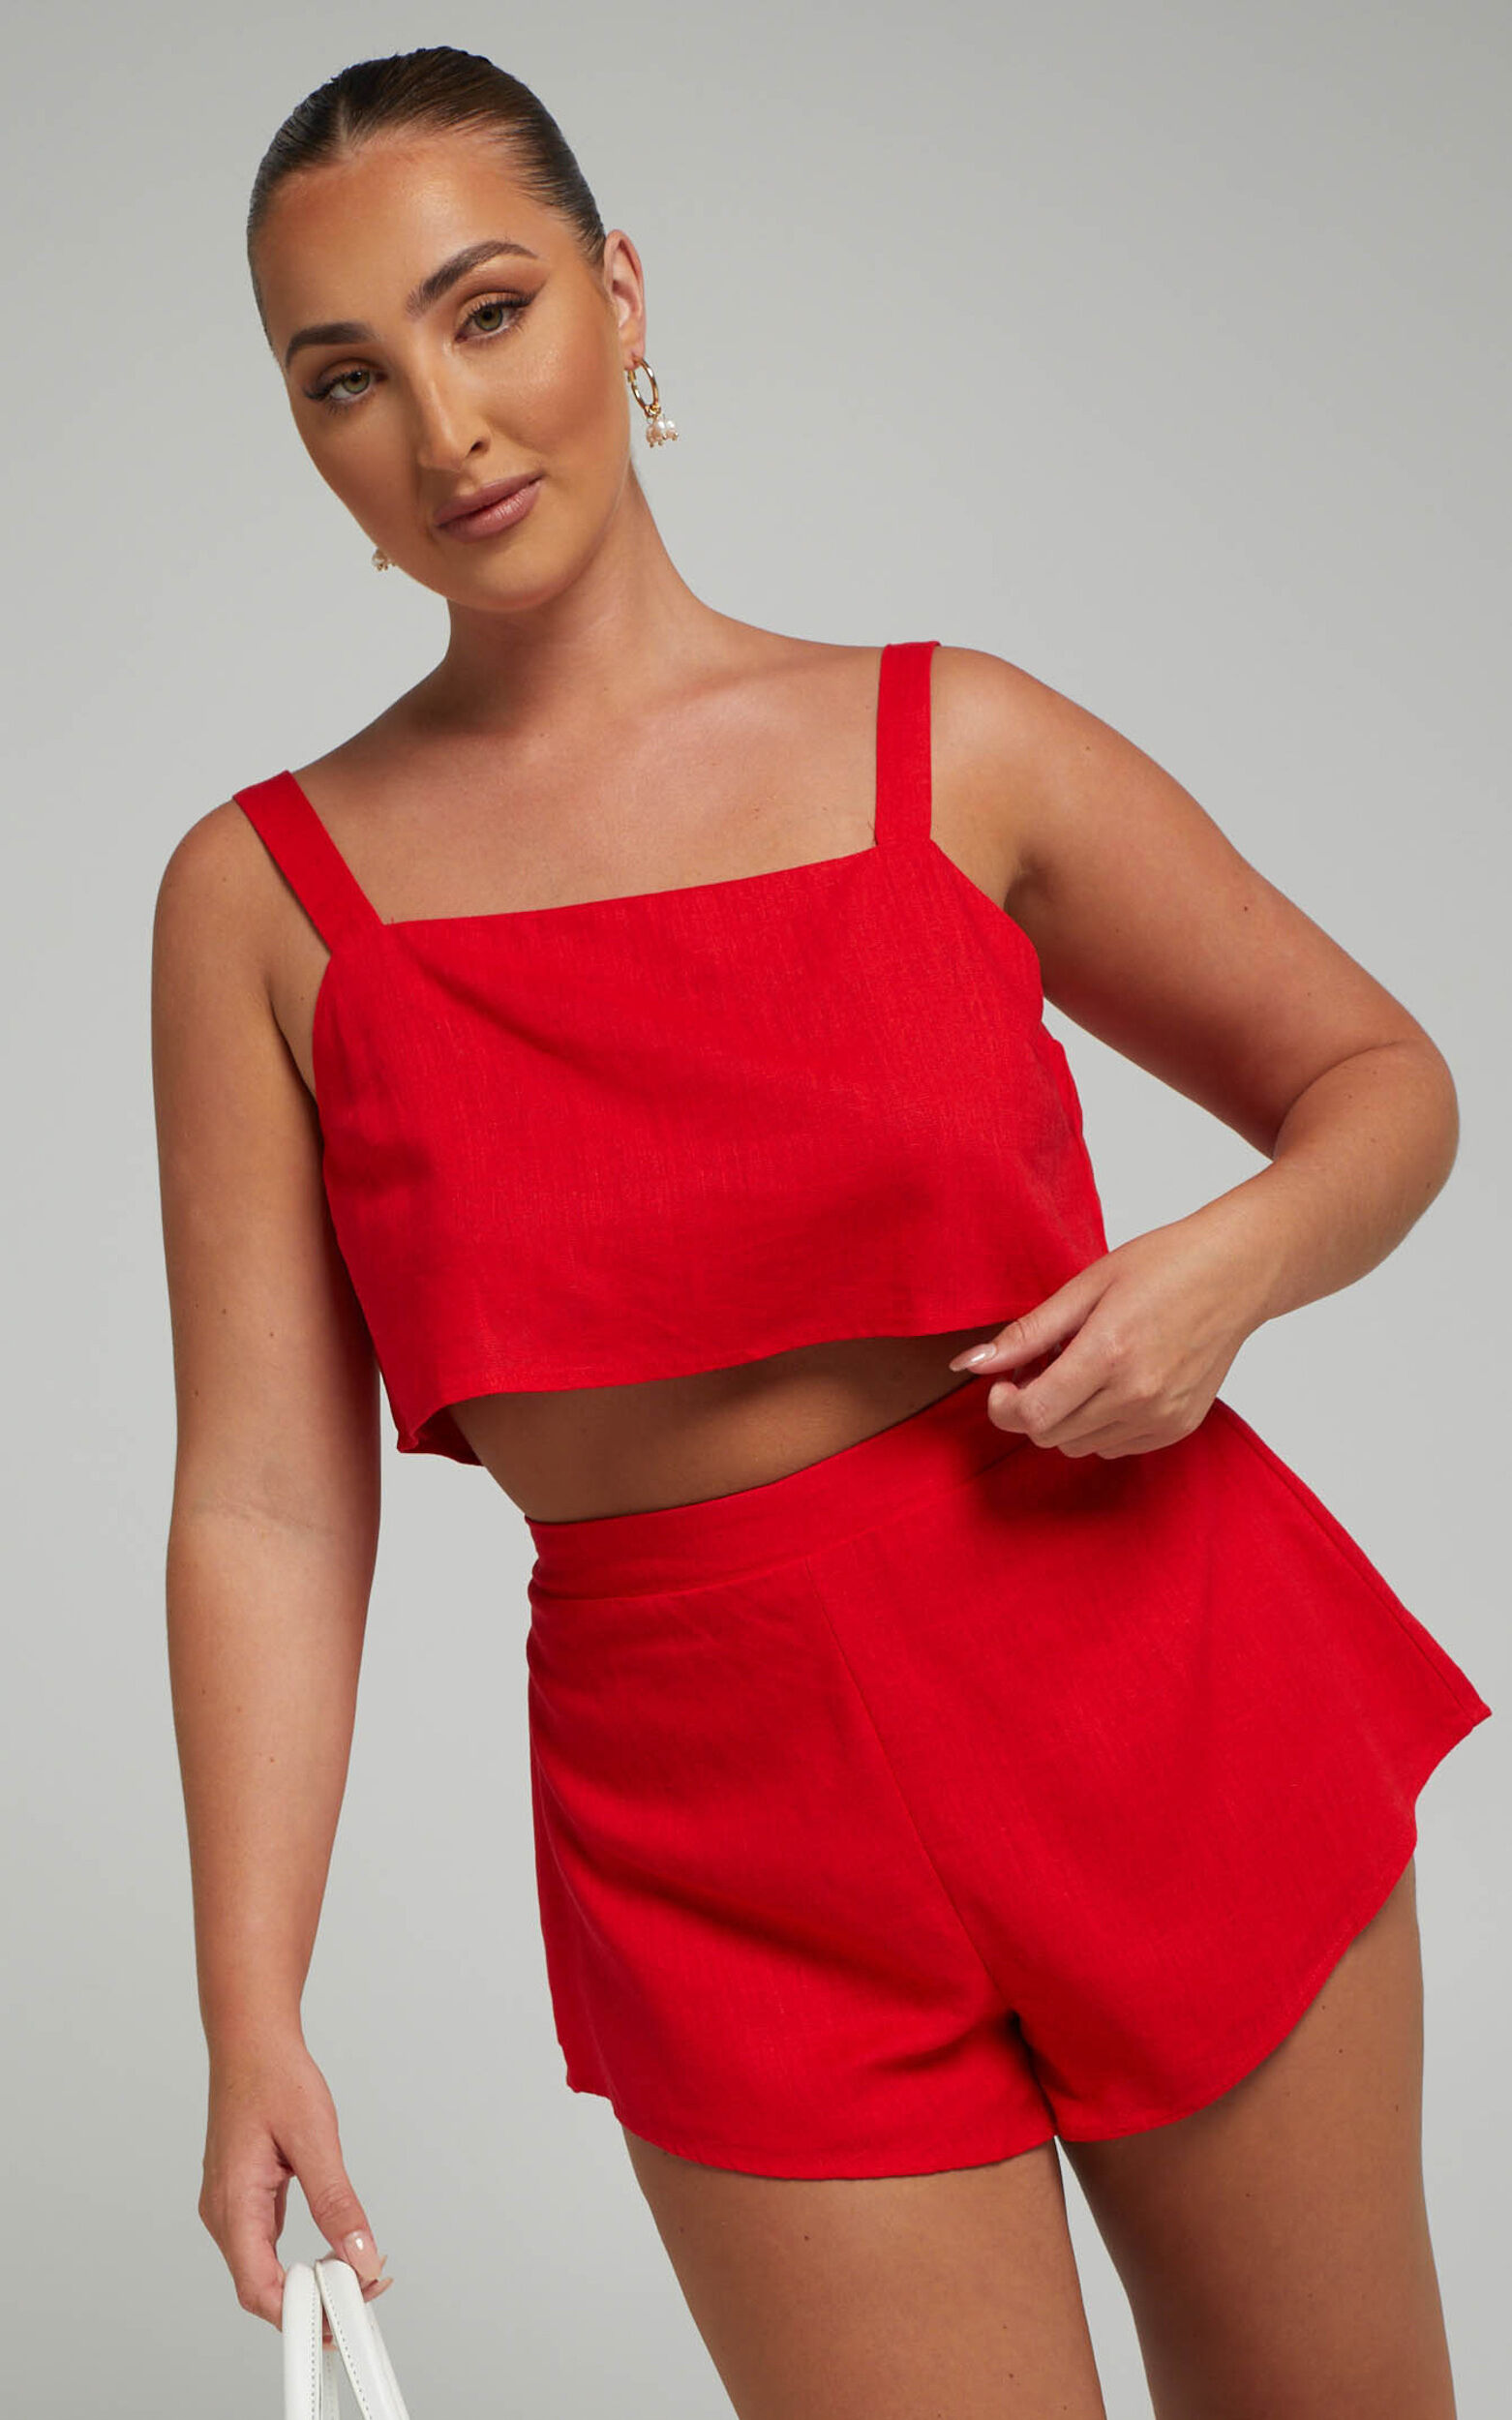 Zanrie Square Neck Crop Top and High Waist Mini Flare Shorts in Red - 04, RED6, super-hi-res image number null